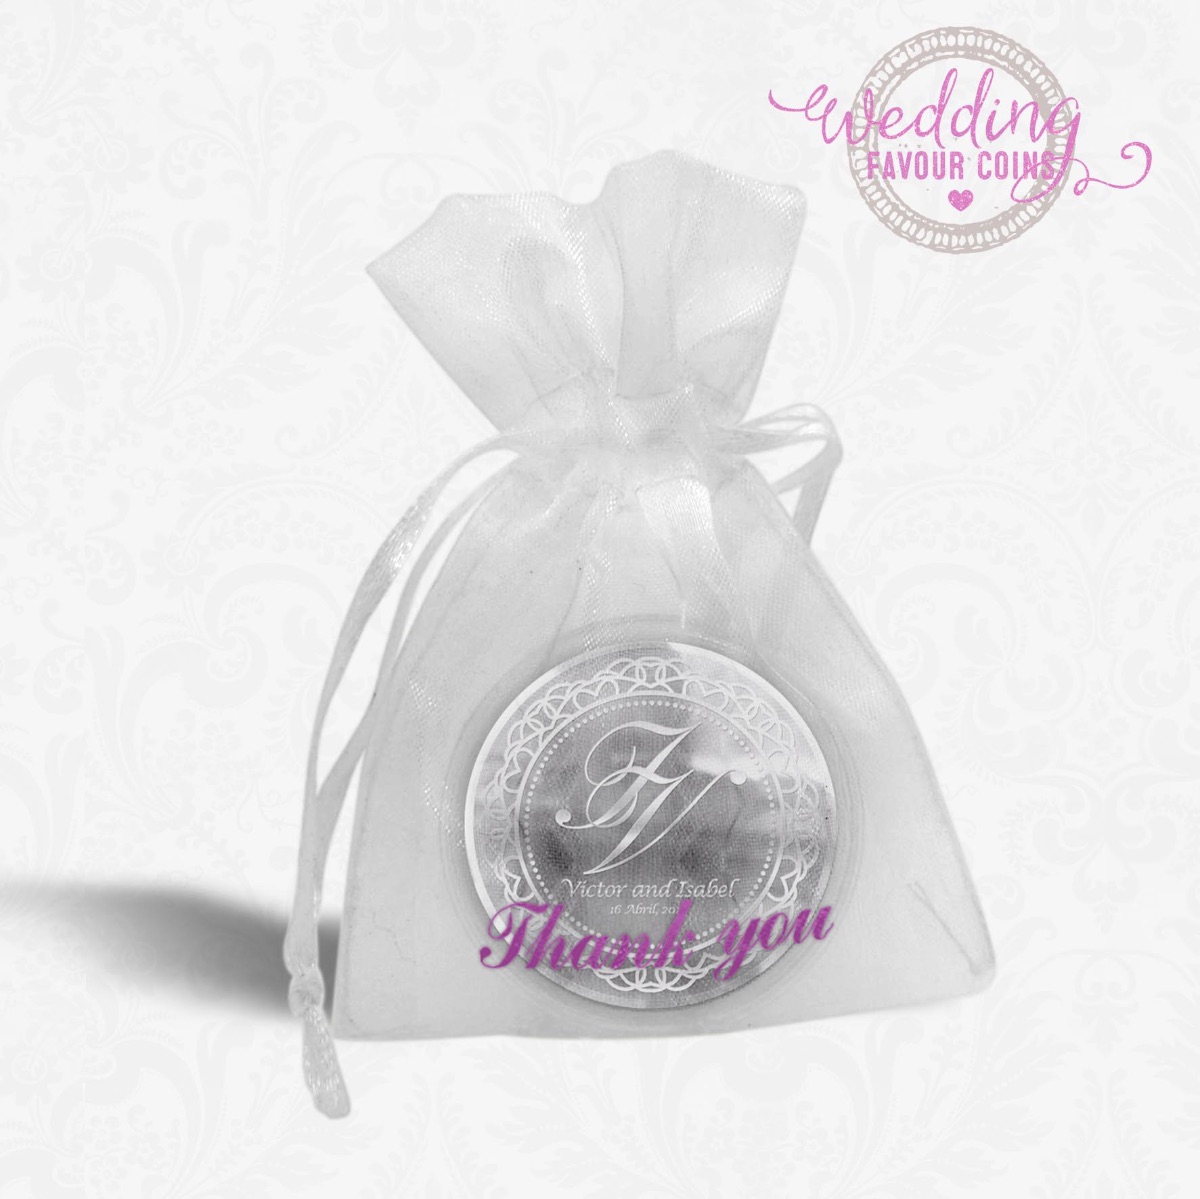 The Wedding Favour Coins-Image-12